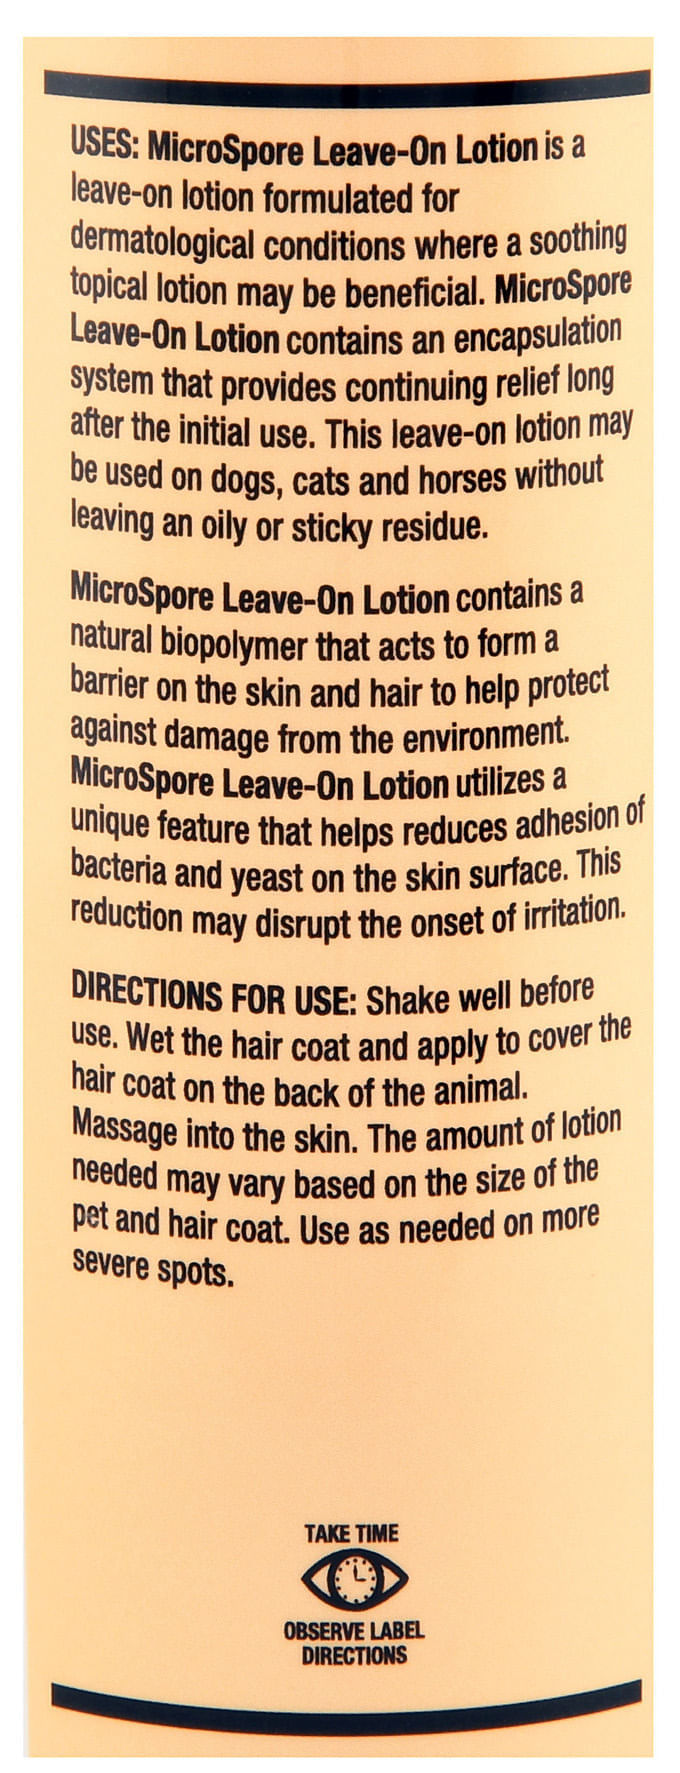 MicroSpore-Leave-On-Lotion